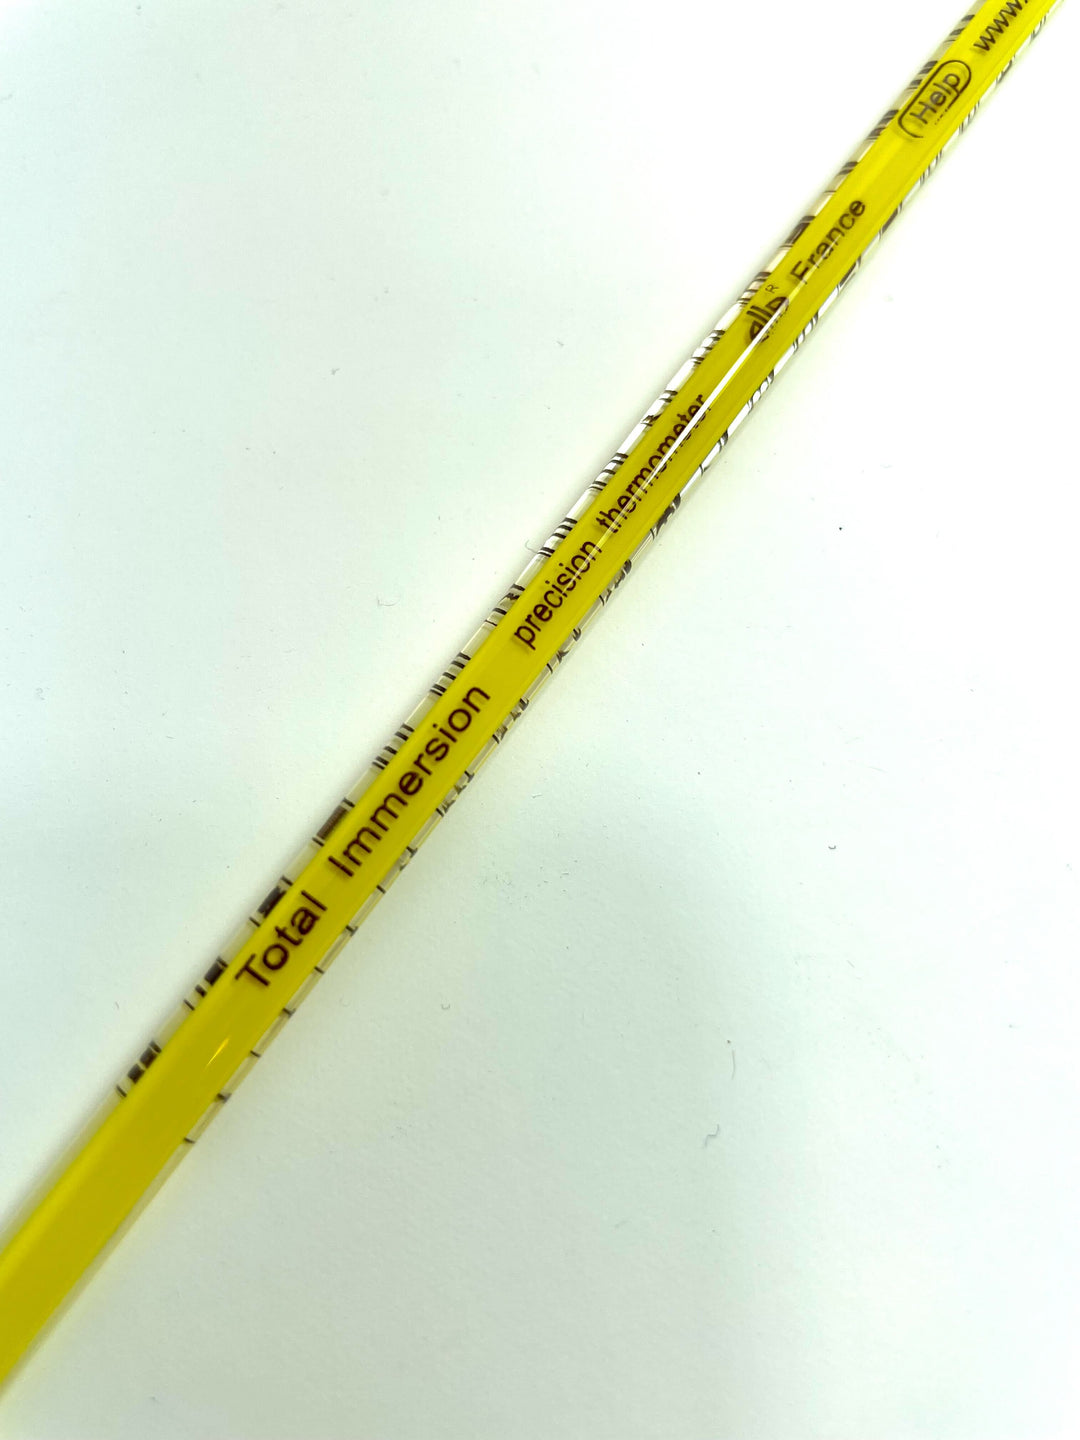 Celsius Glass Mercury Thermometers